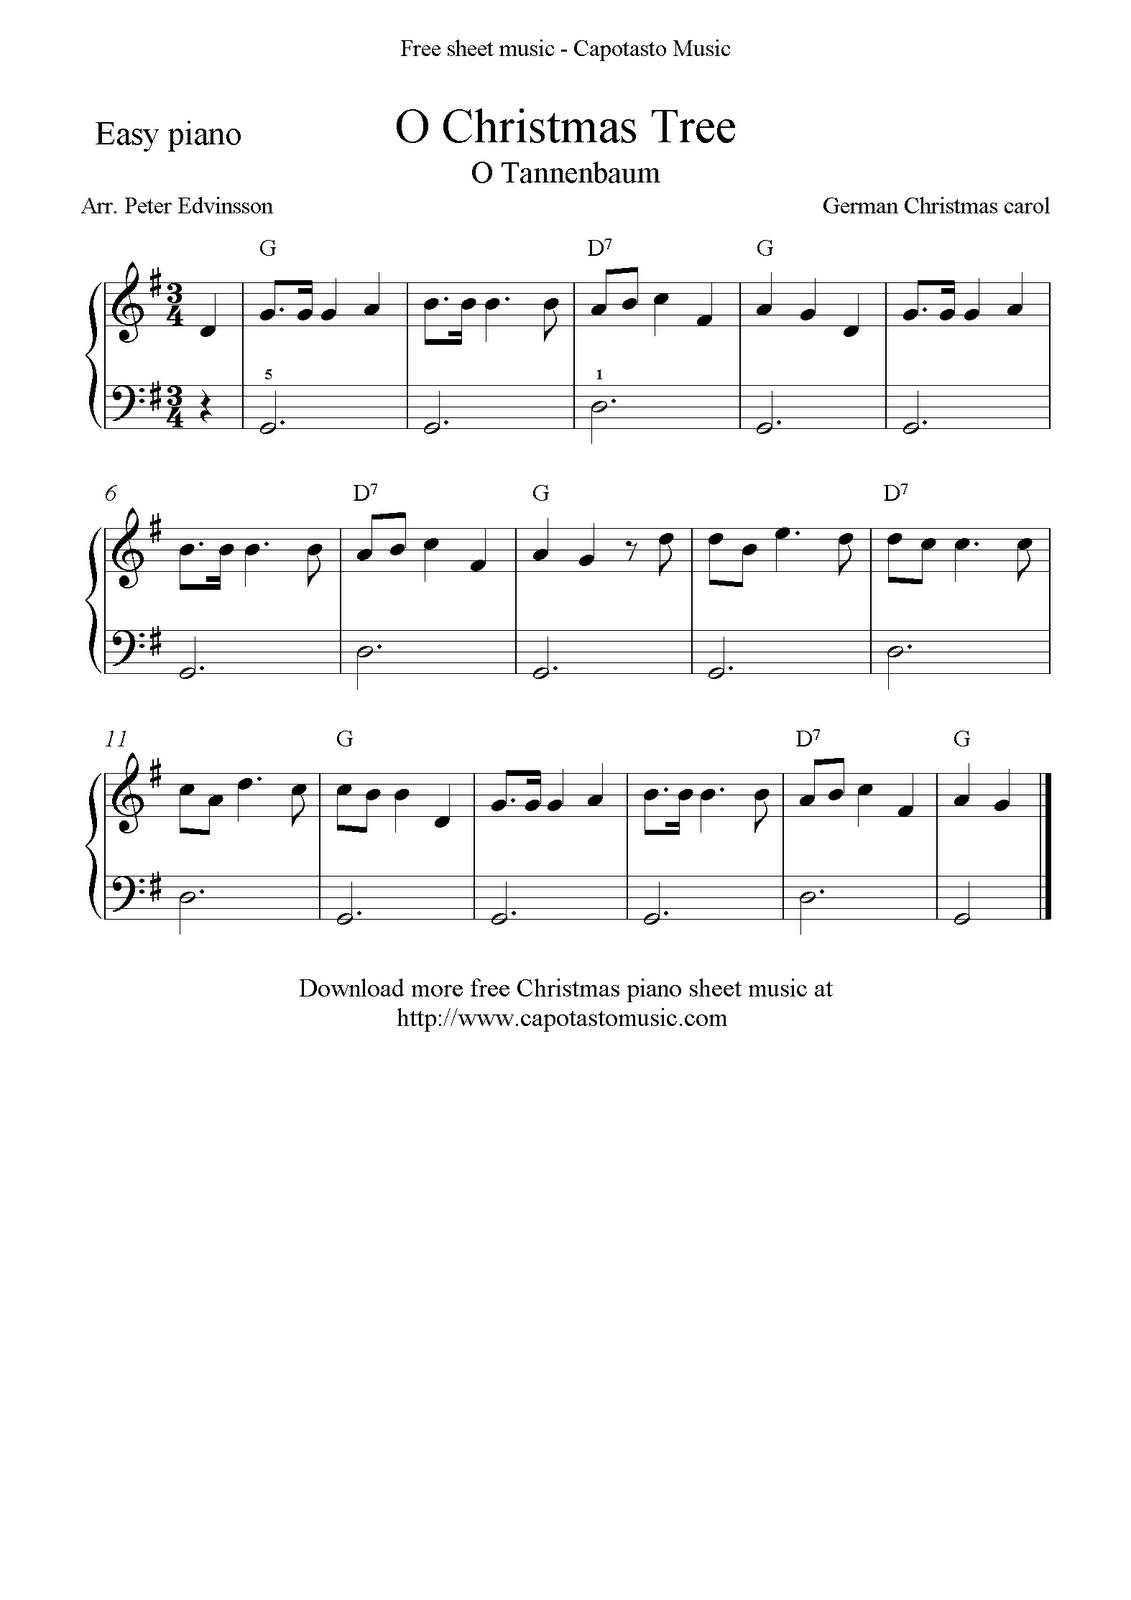 Free Christmas Sheet Music For Easy Piano Solo, O Christmas Tree - Free Printable Christmas Sheet Music For Piano